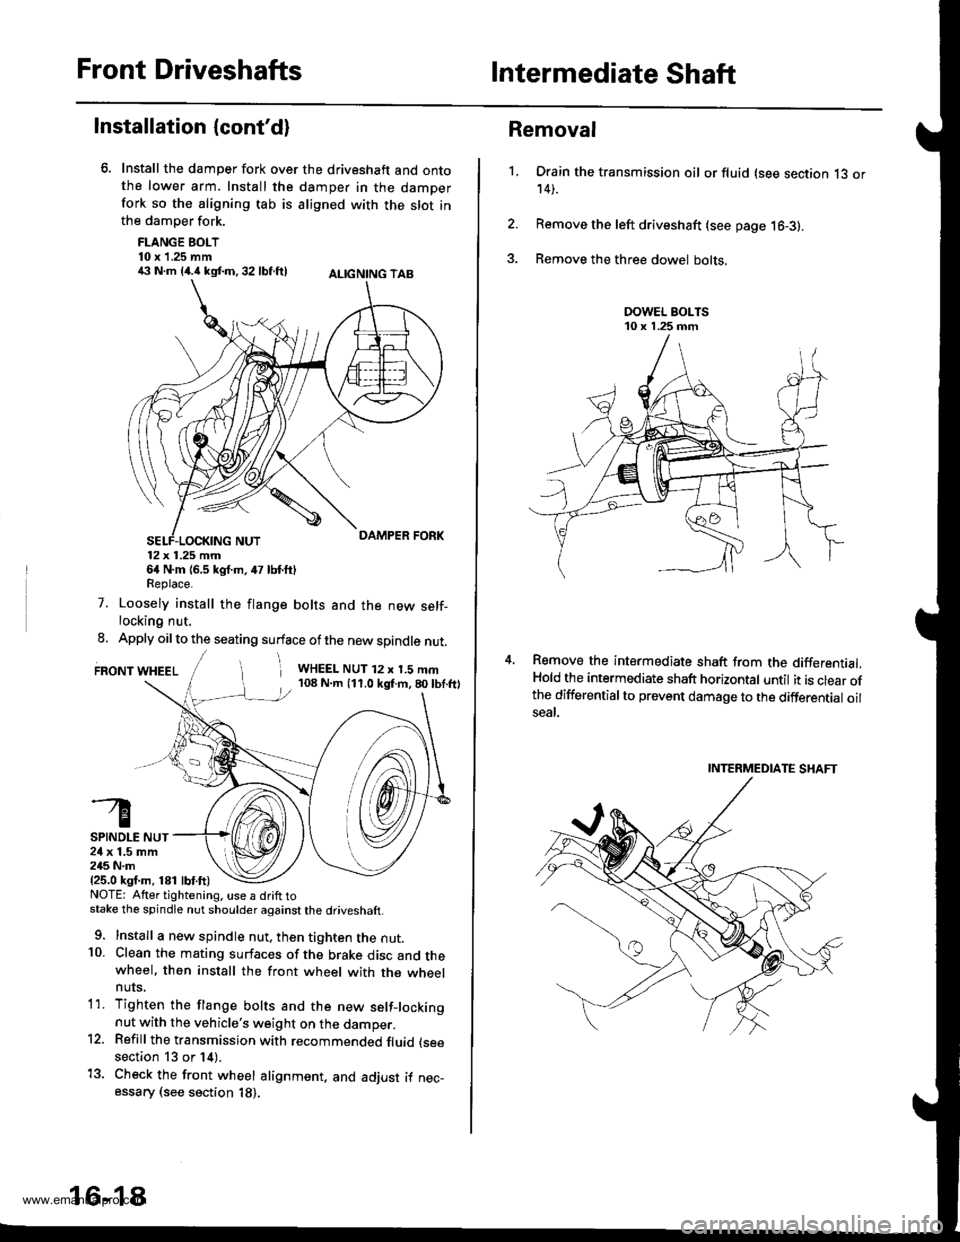 HONDA CR-V 1998 RD1-RD3 / 1.G Workshop Manual 
Front DriveshaftsIntermediate Shaft
Installation {contd}
Install the damper fork over the driveshaft and ontothe lower arm. Install the damper in the damperfork so the aligning tab is aligned with t